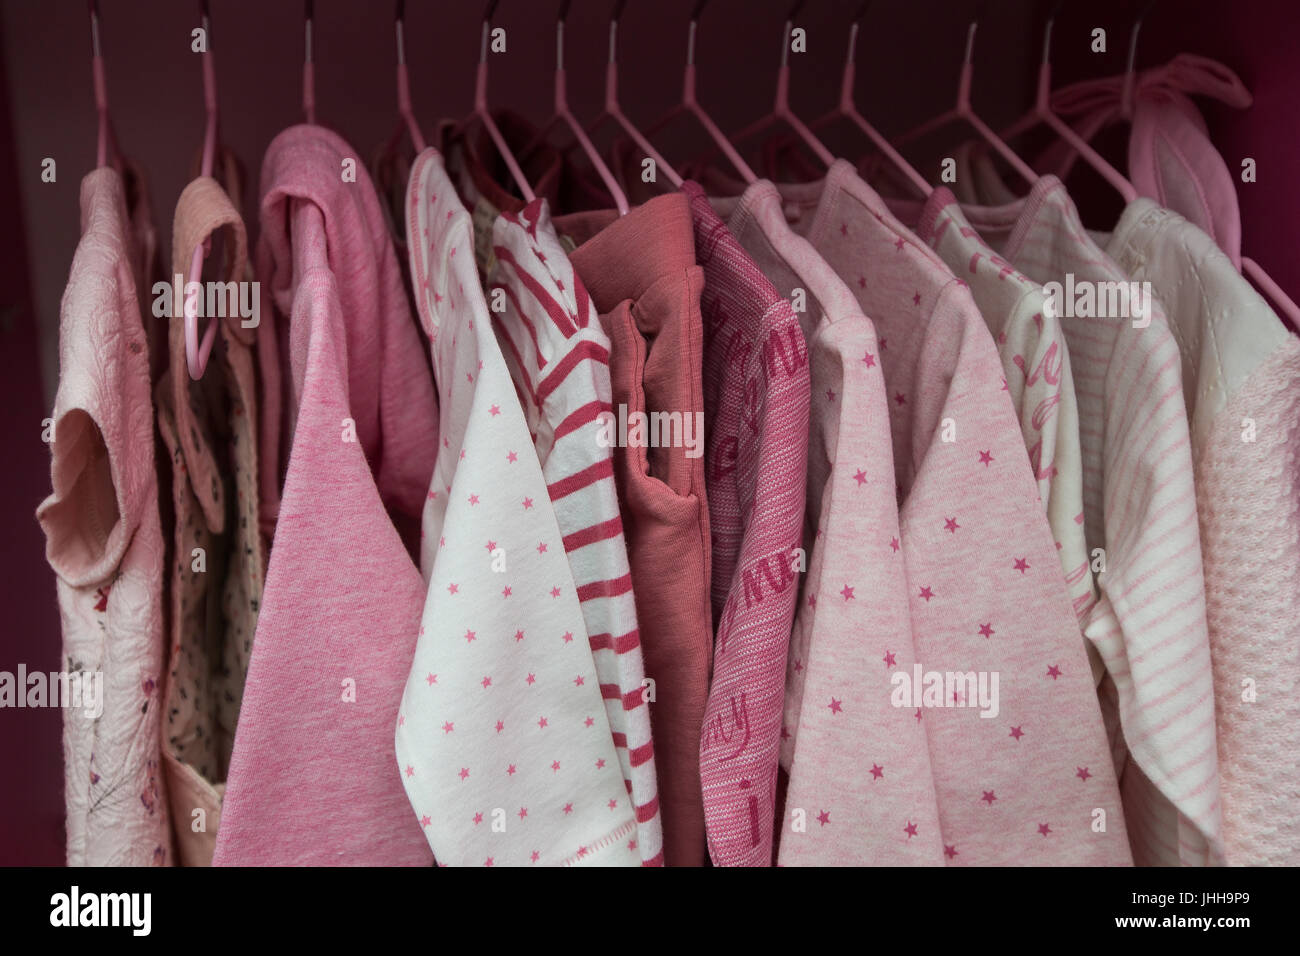 https://c8.alamy.com/comp/JHH9P9/a-lot-of-white-childrens-clothes-on-hangers-childrens-wardrobe-with-JHH9P9.jpg